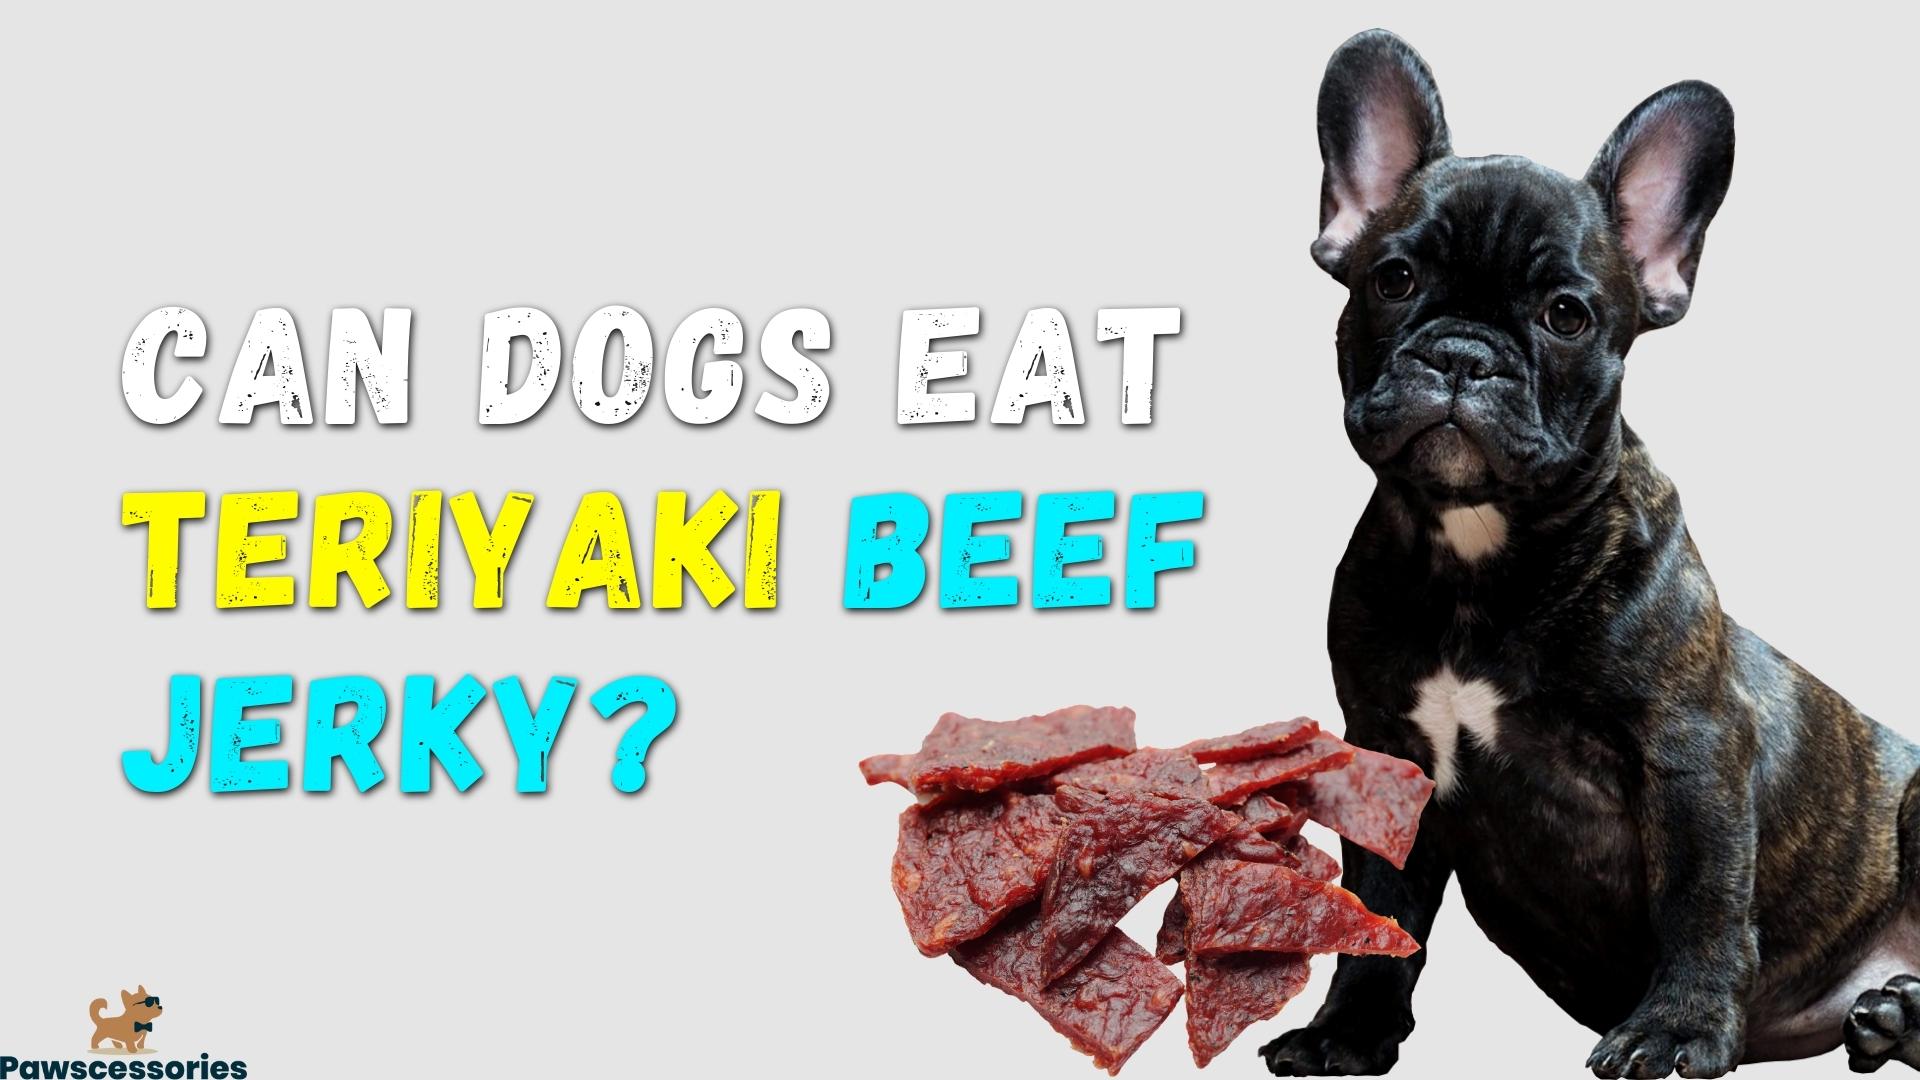 Can Dogs Eat Teriyaki Beef Jerky? 3 Dangers + Tips If They Do